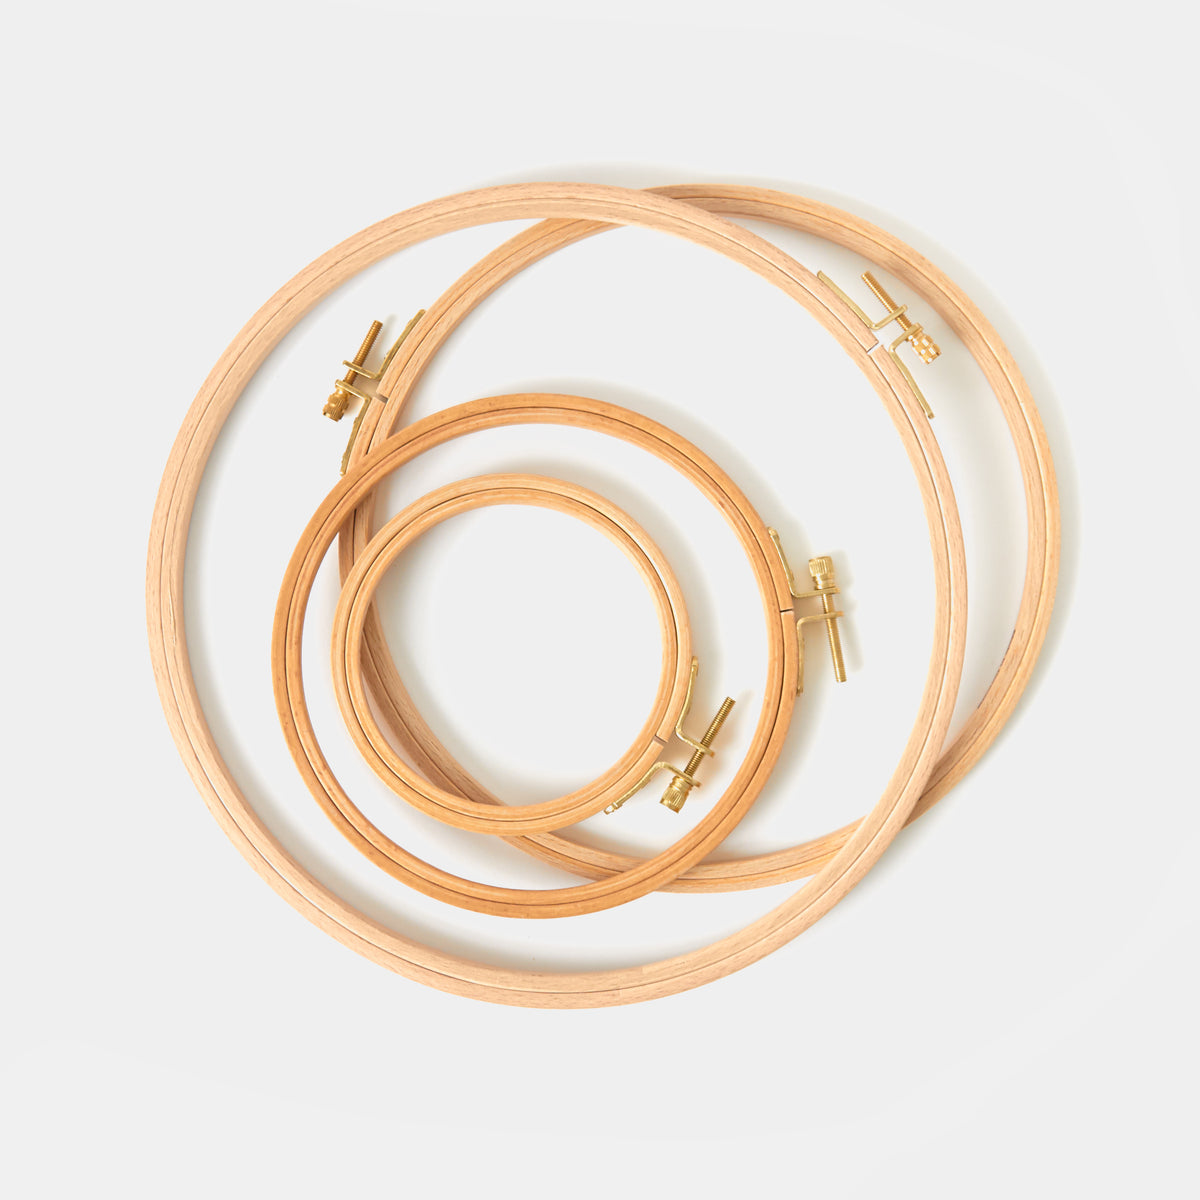 Beech Embroidery Hoop - Oval - Stitched Modern